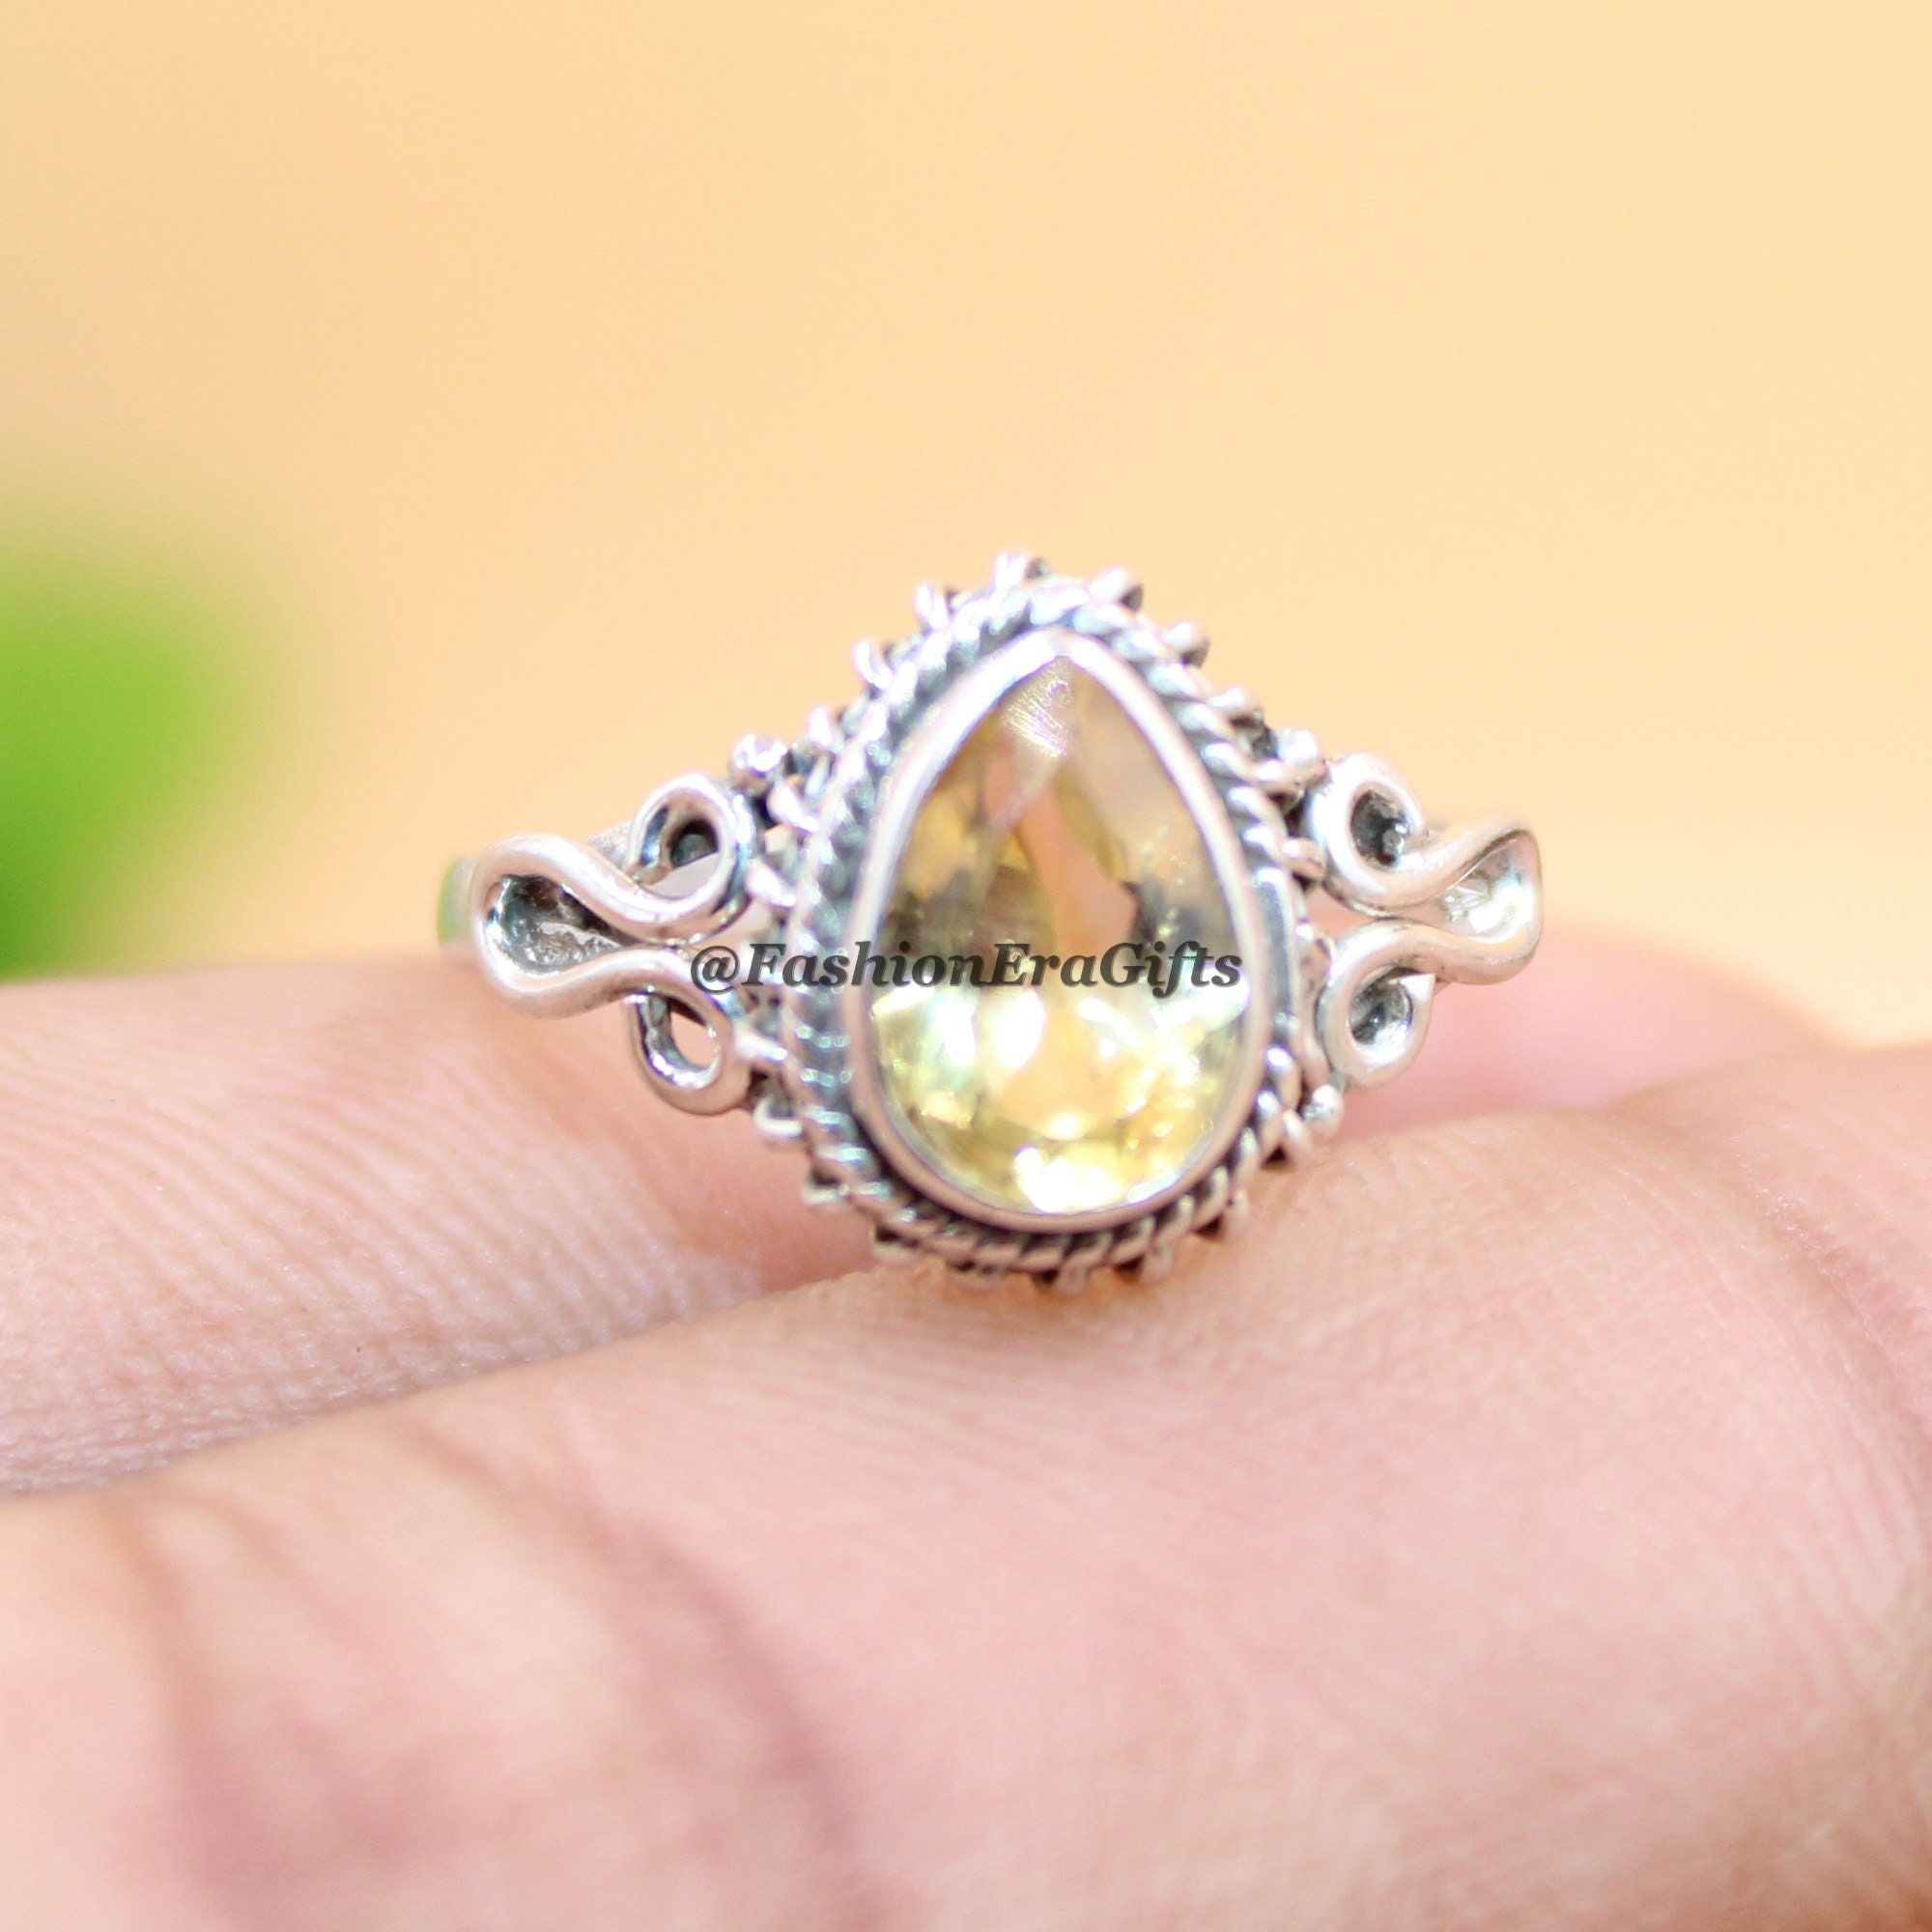 RVS111 Beautiful Pretty Charming Natural 8x6 Citrine 925 Sterling Silver Ring 